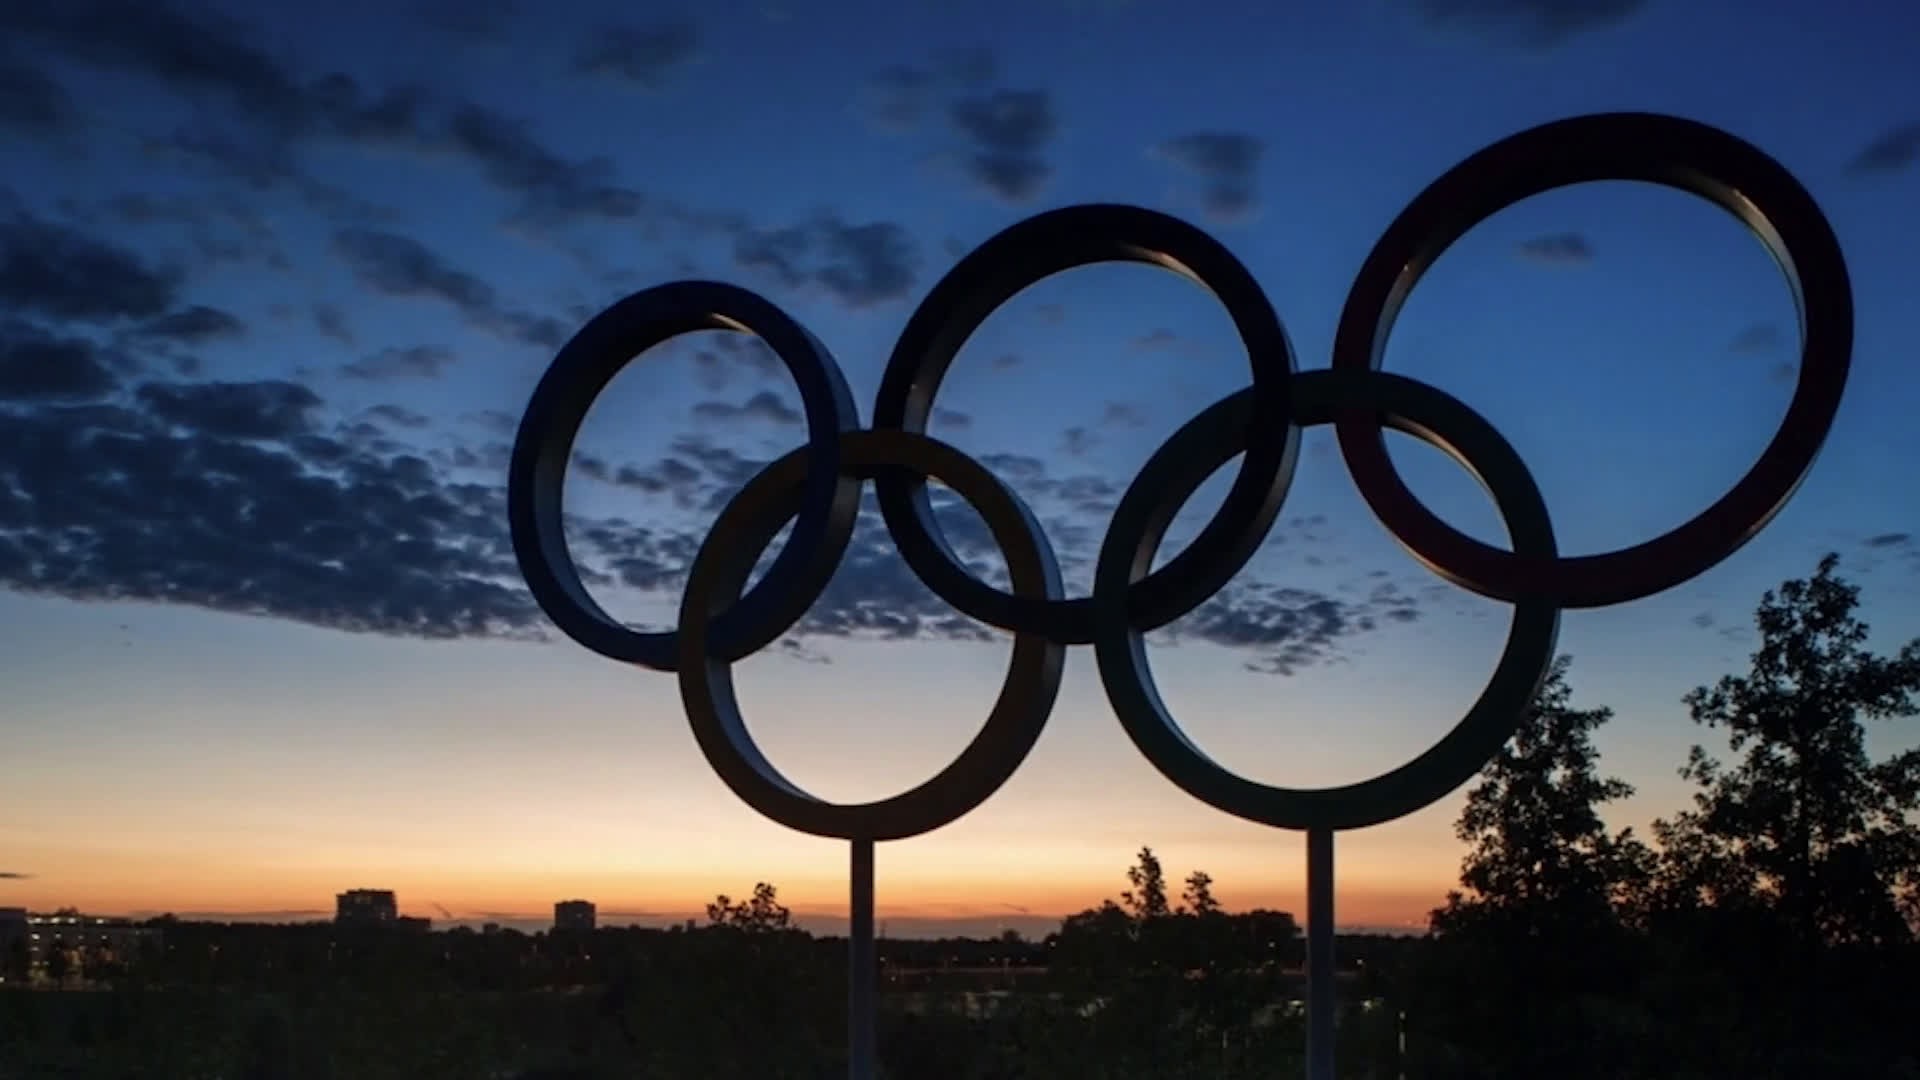 Together We Change The World: The Olympic Fire